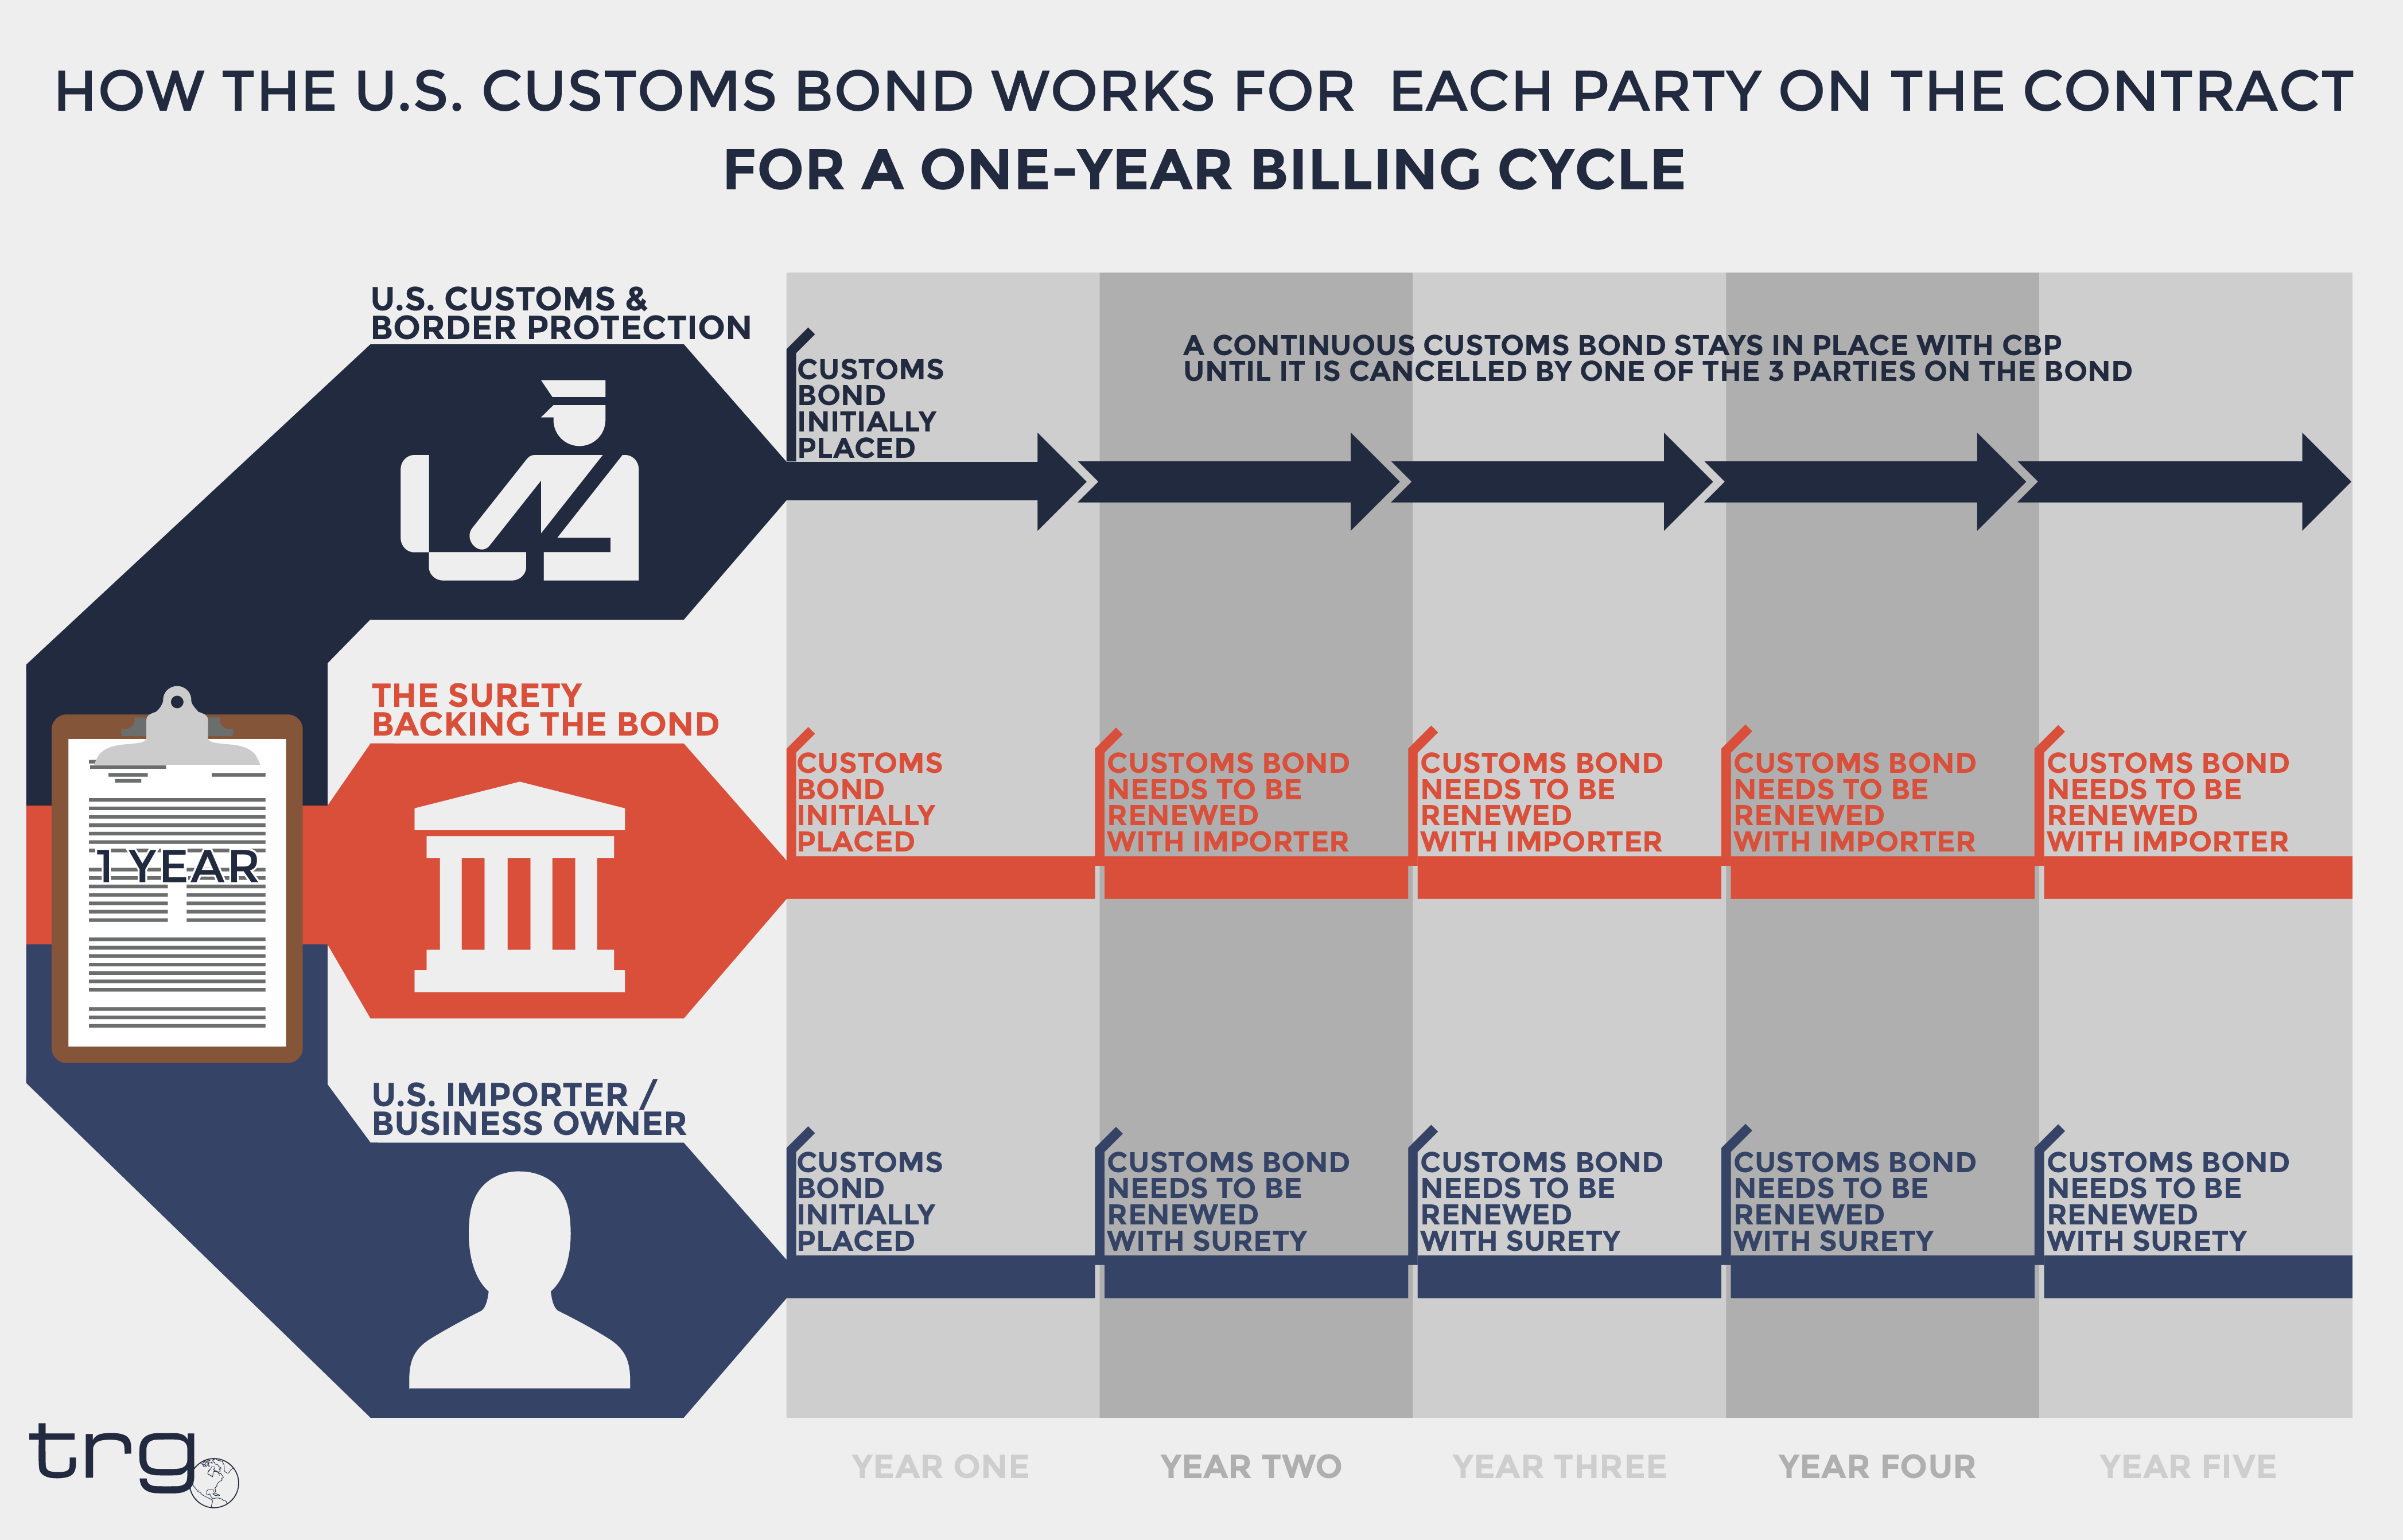 How a multi year U.S. Customs Bond works over the course of multiple years.